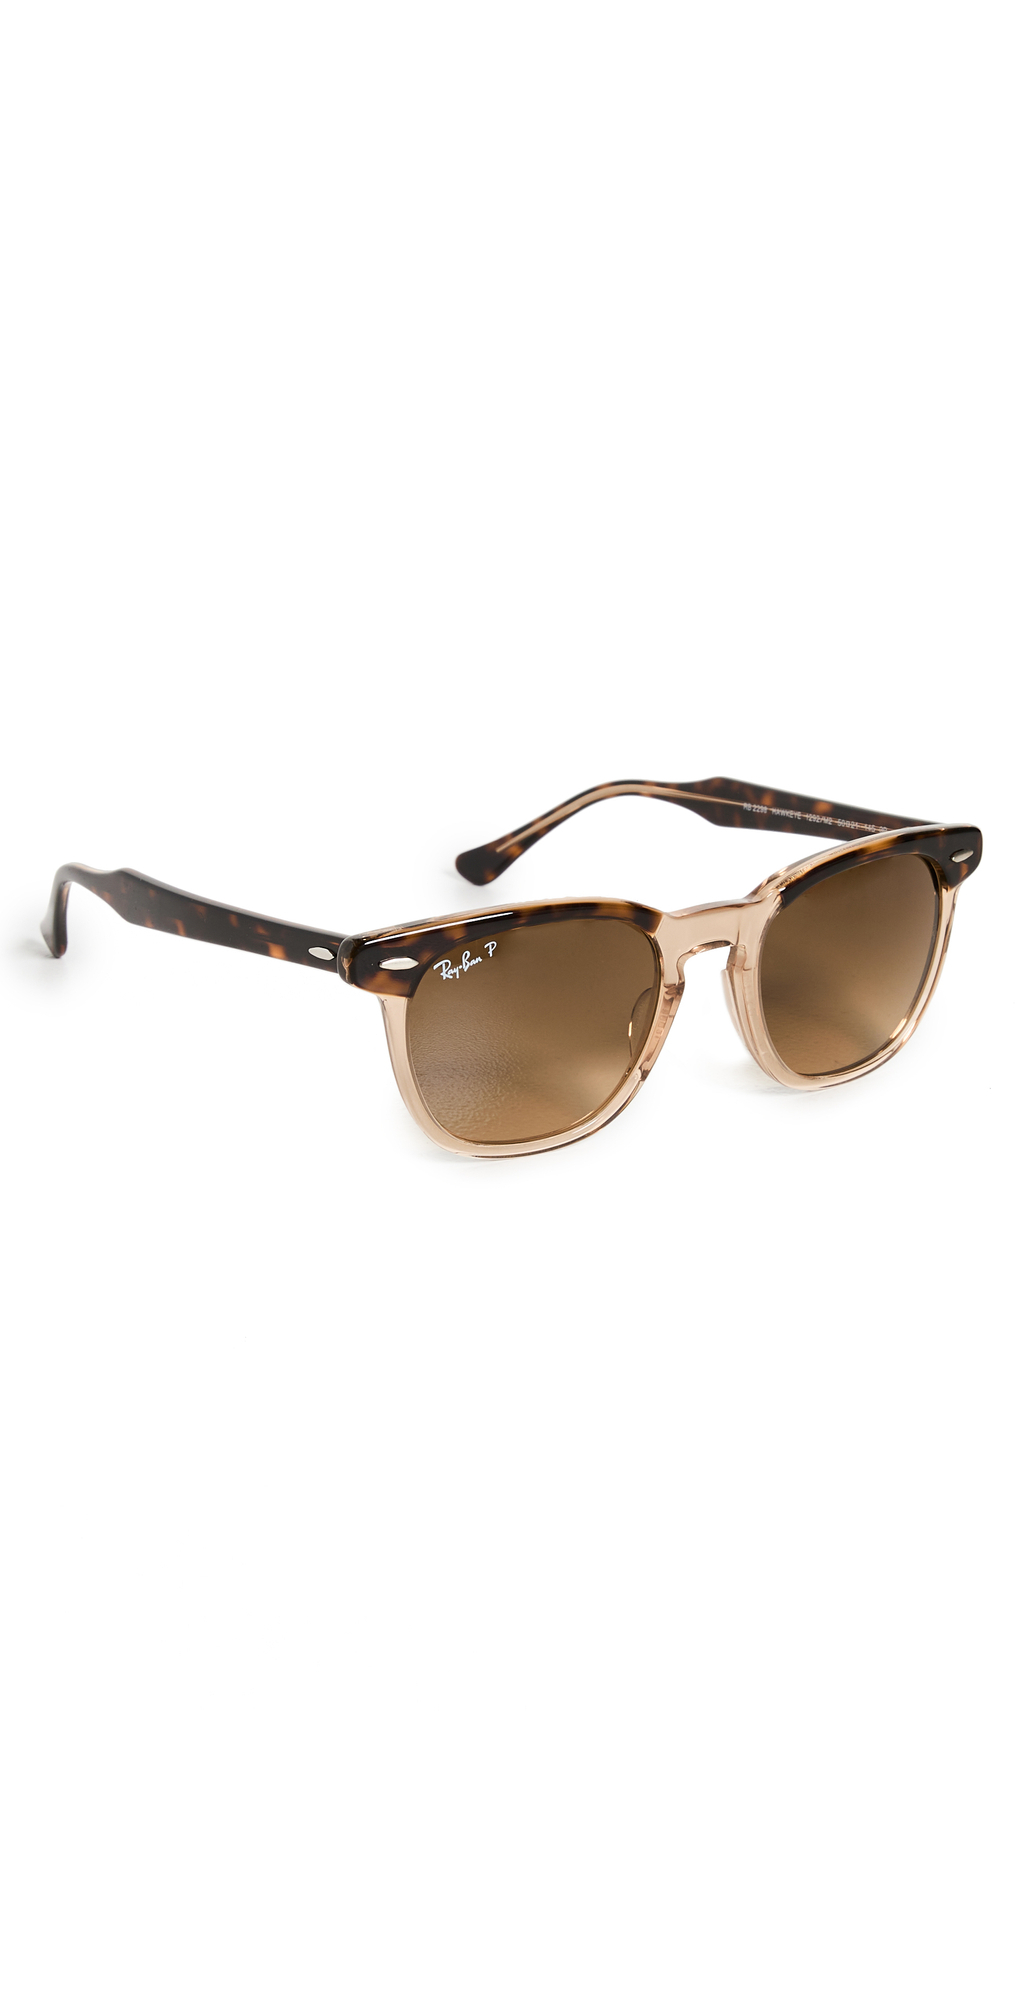 Ray-Ban 0RB2298 Evolution Square Sunglasses in brown / transparent